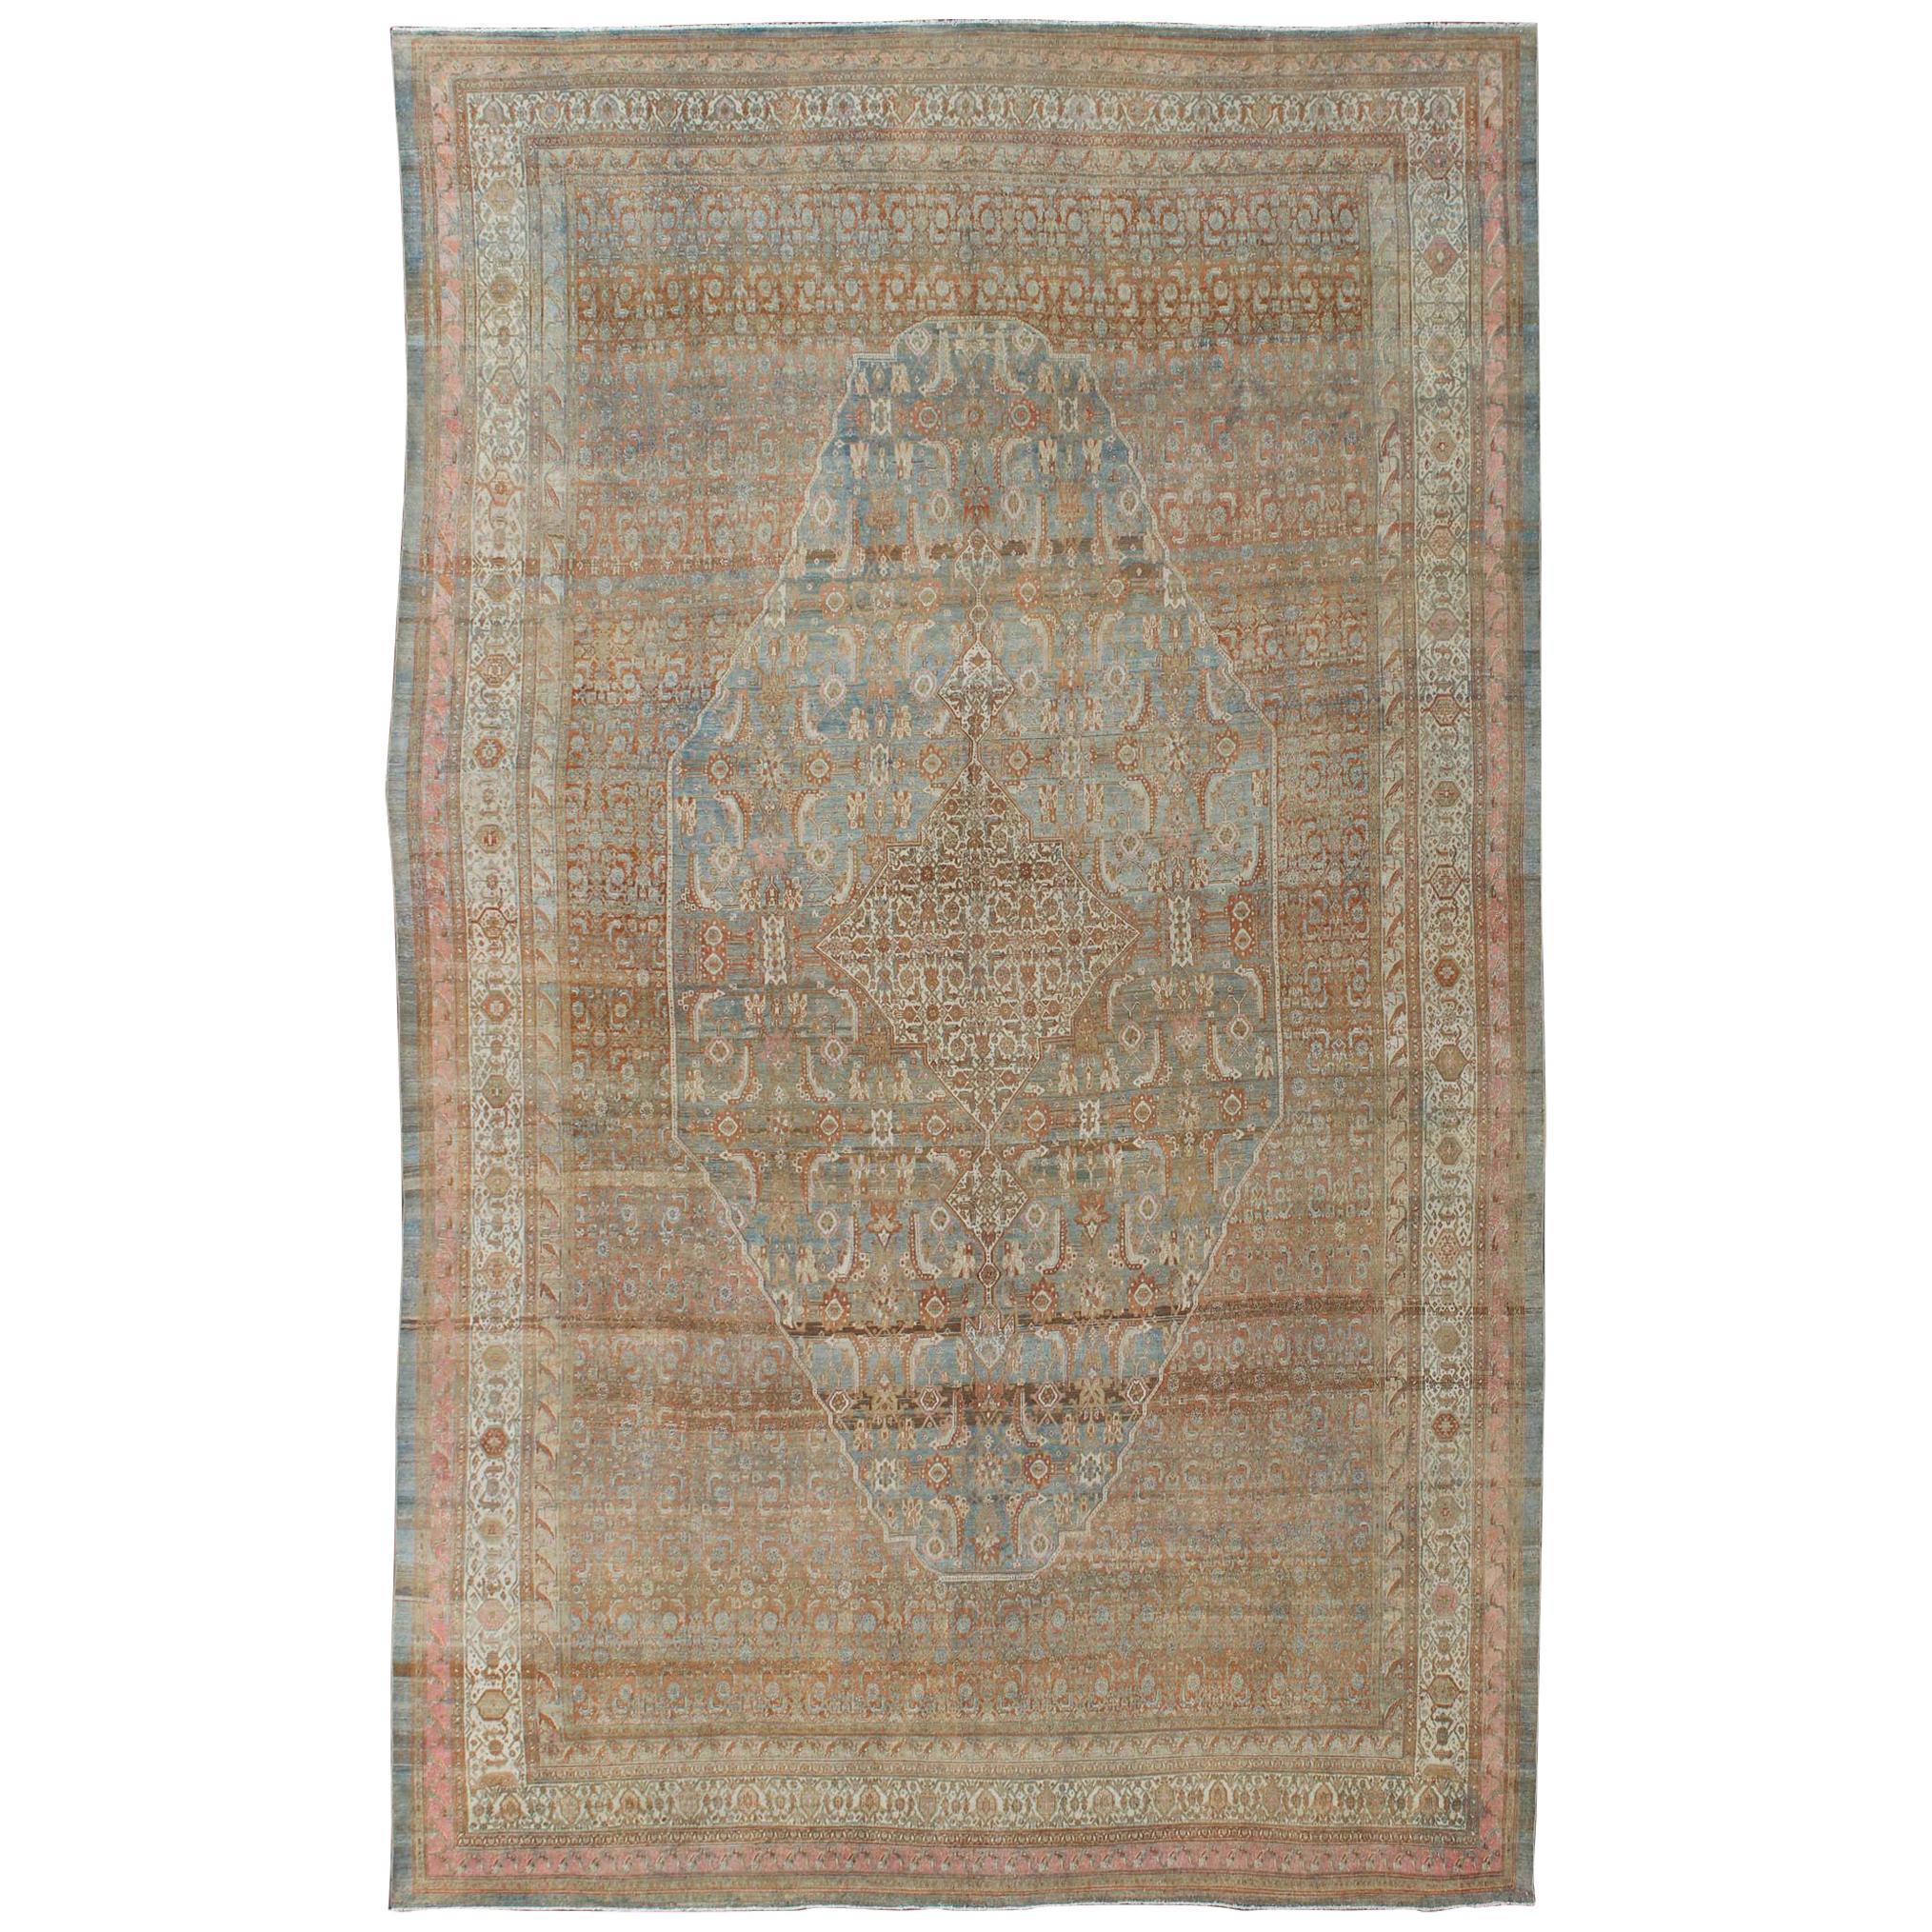 Early 20th Century Large Antique Persian Bibikabad Rug in Light Blue Background  For Sale